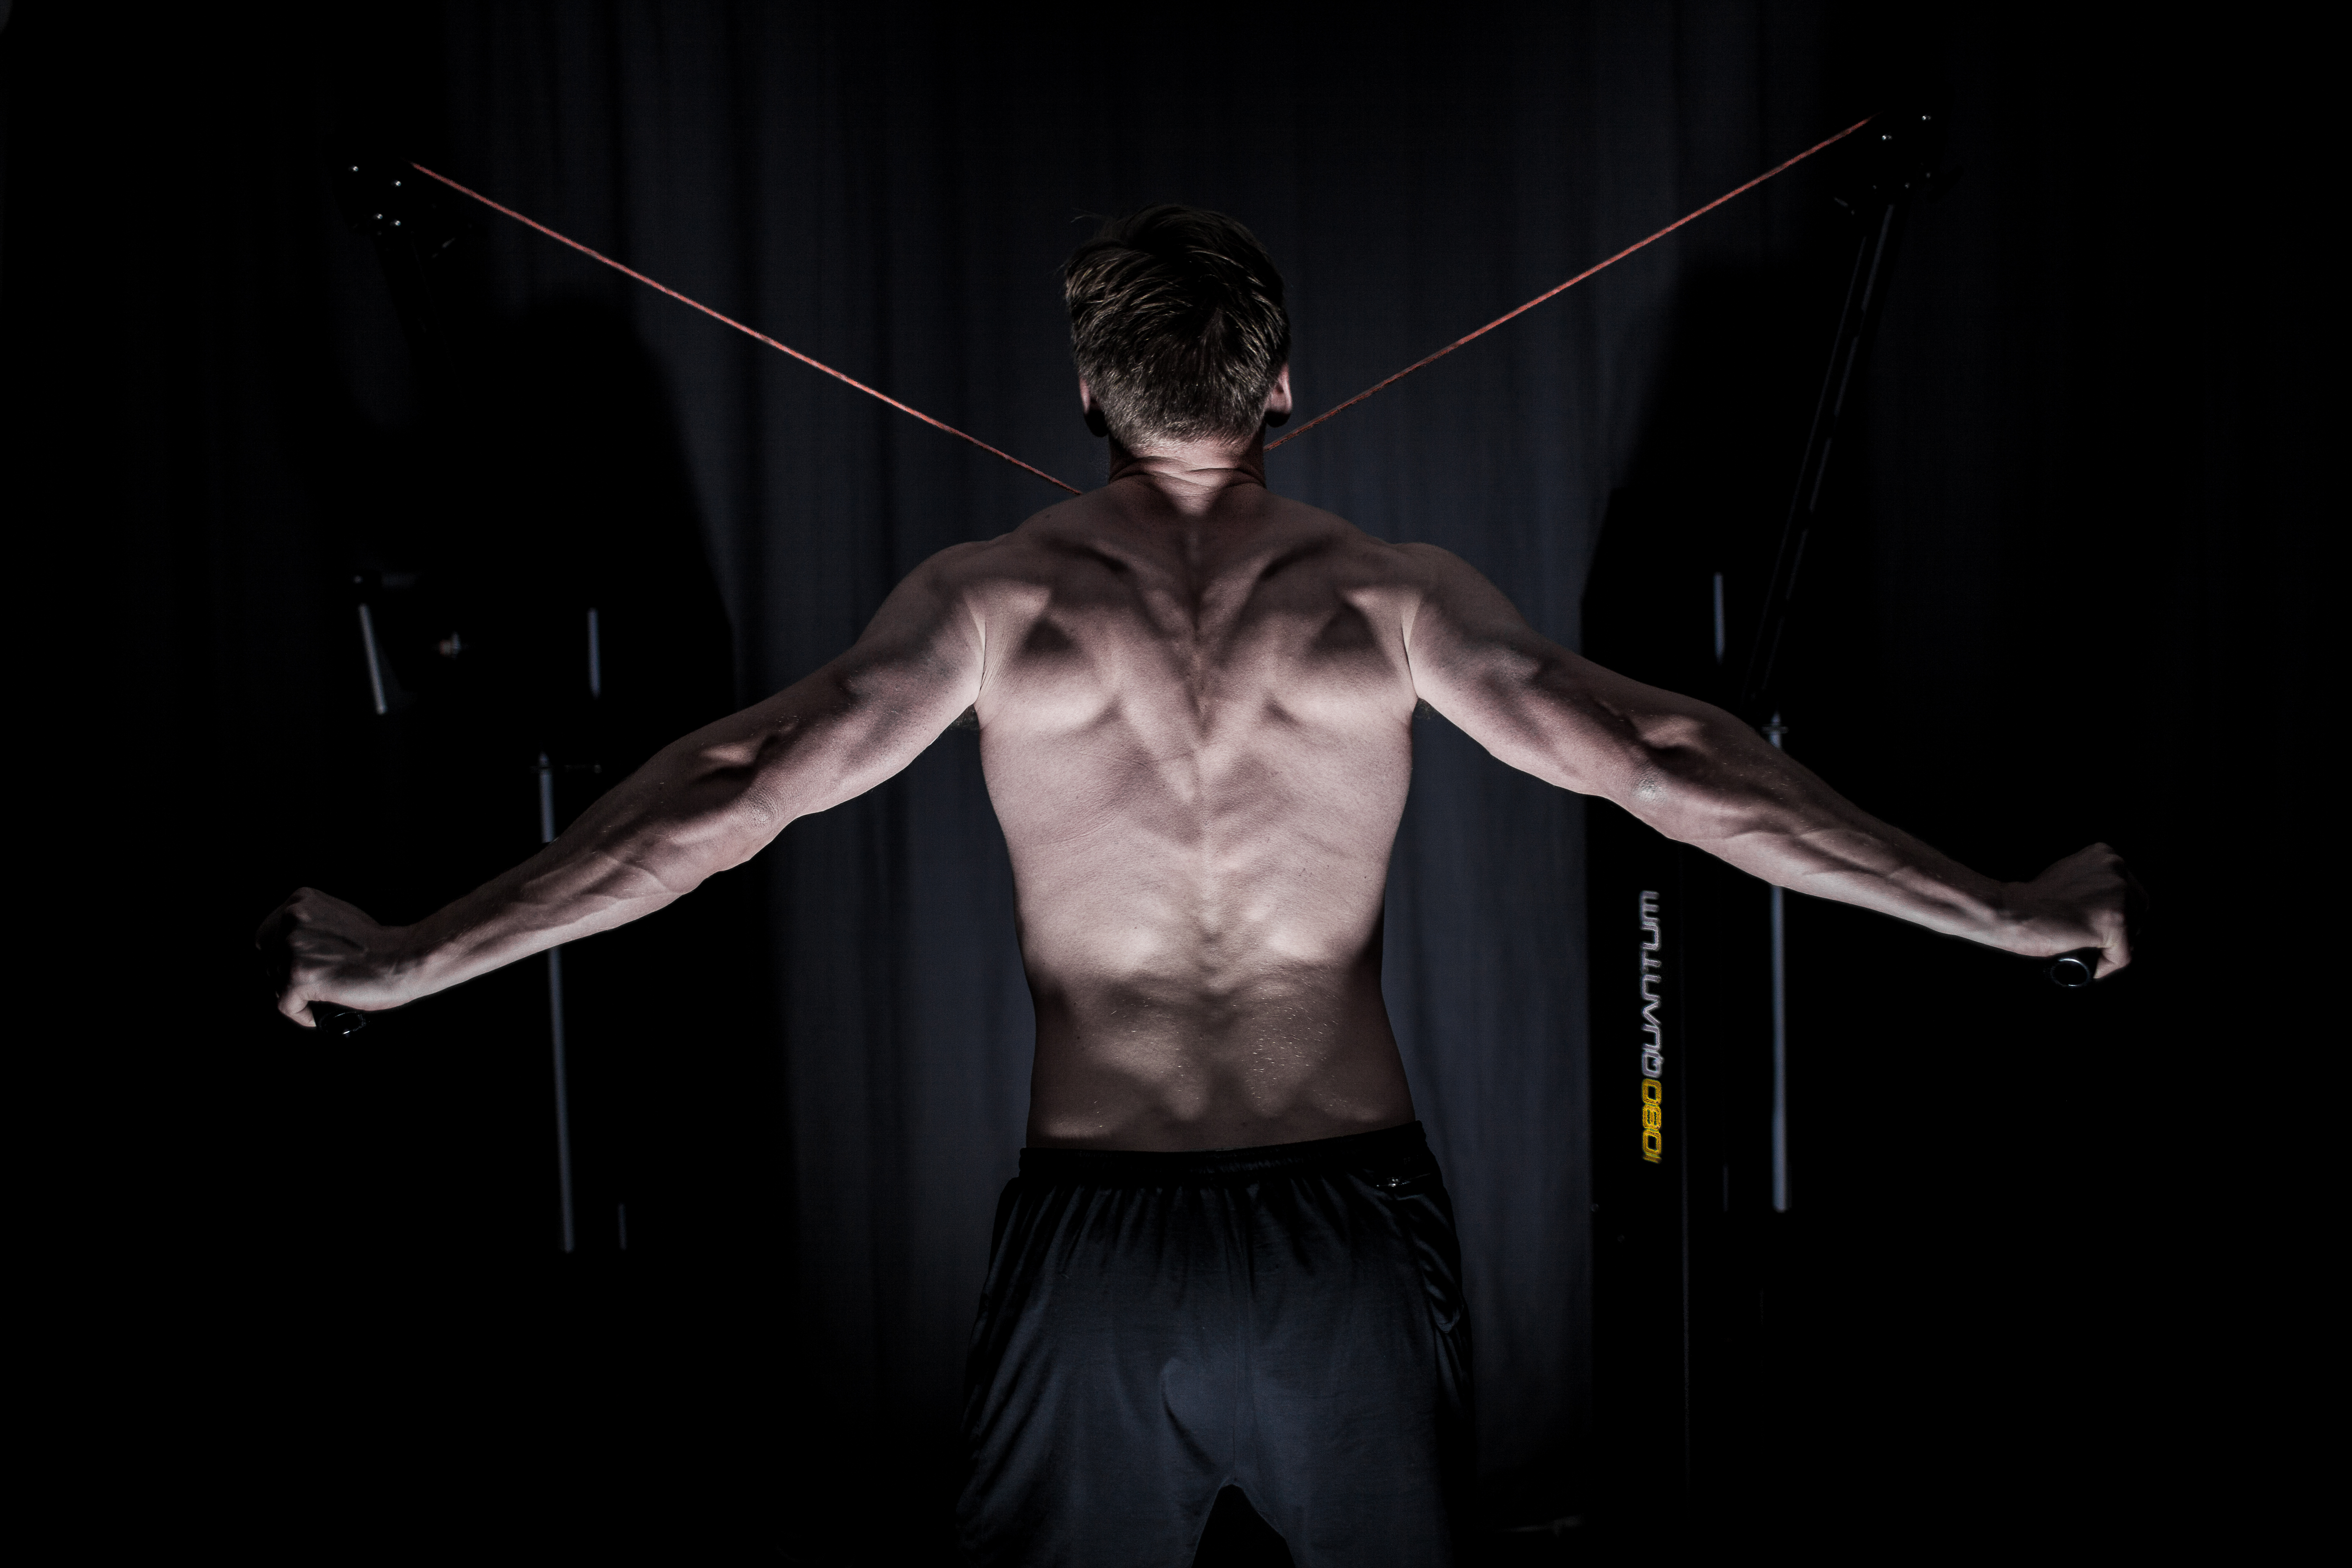 Article: The New Paradigm in Performance Training and Rehabilitation